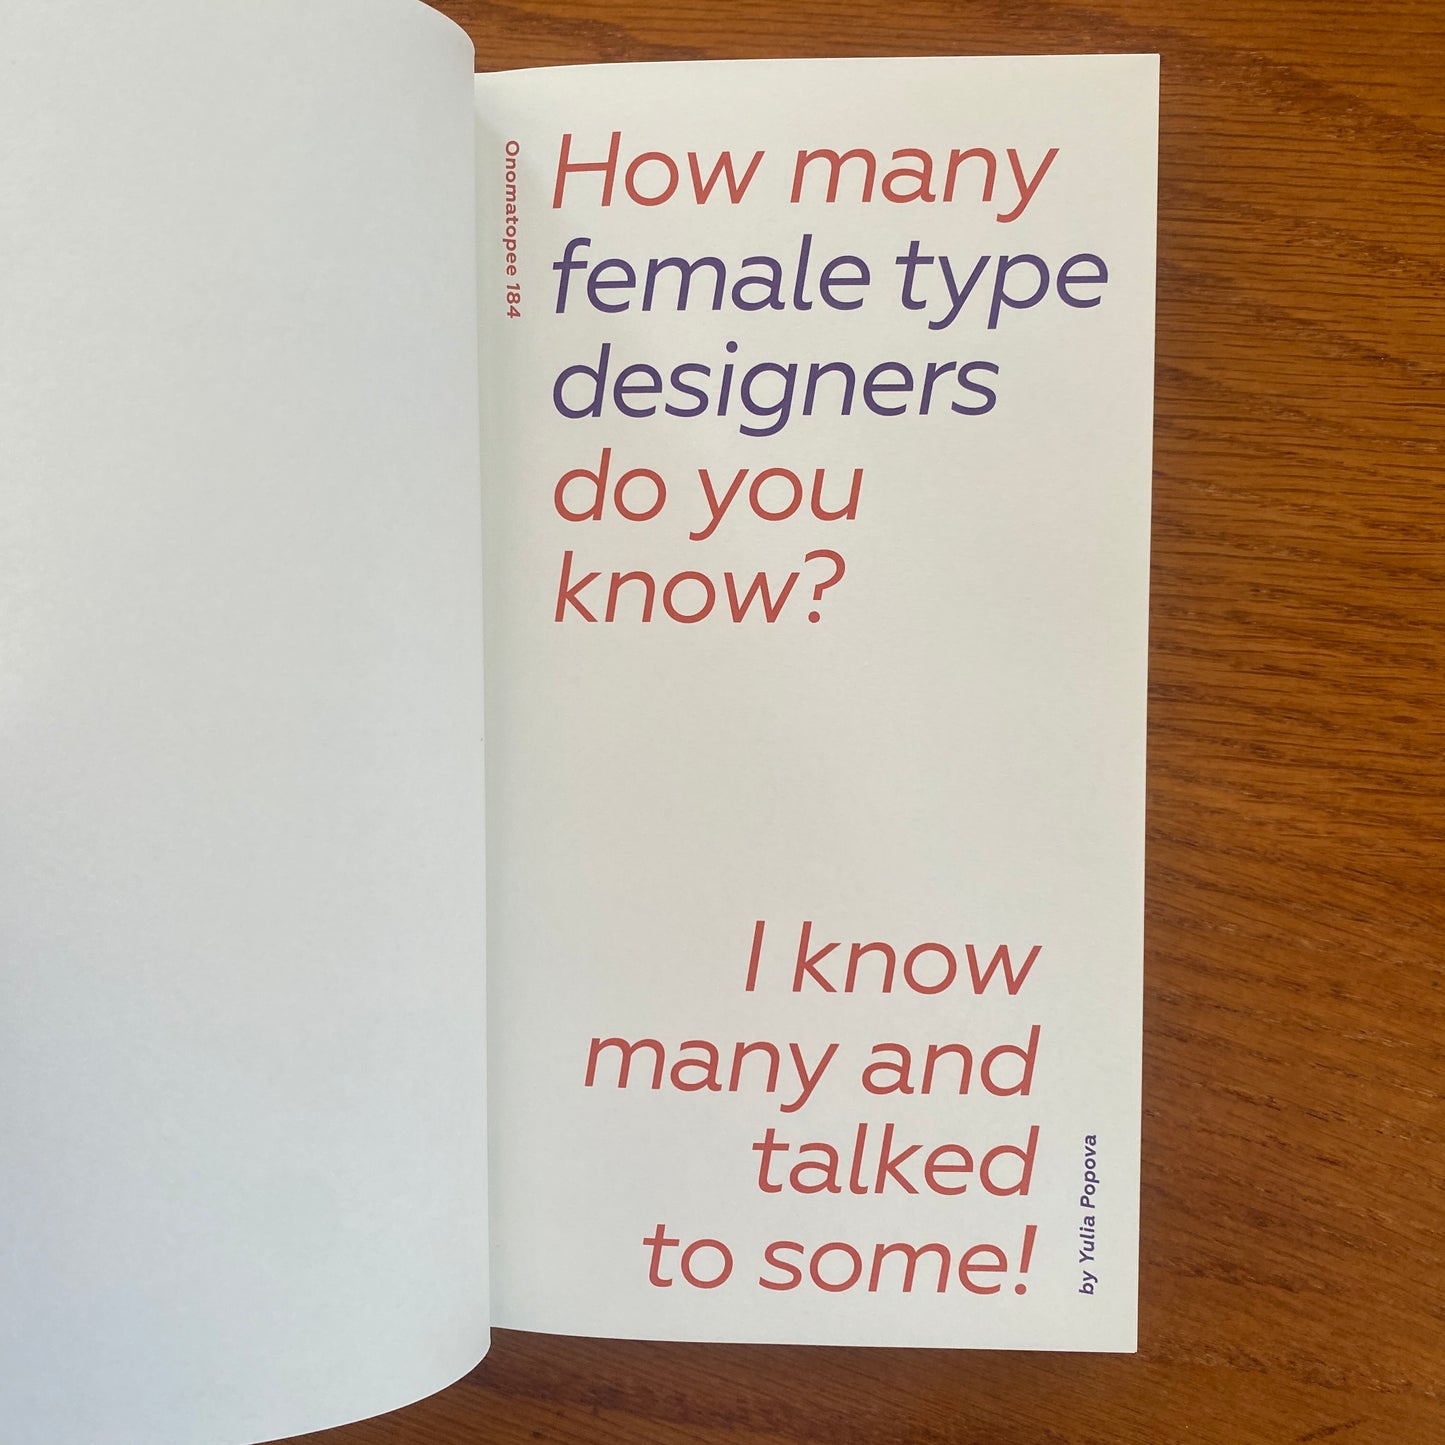 How many female type designers do you know? I know many and talked to some! - Yulia Popova